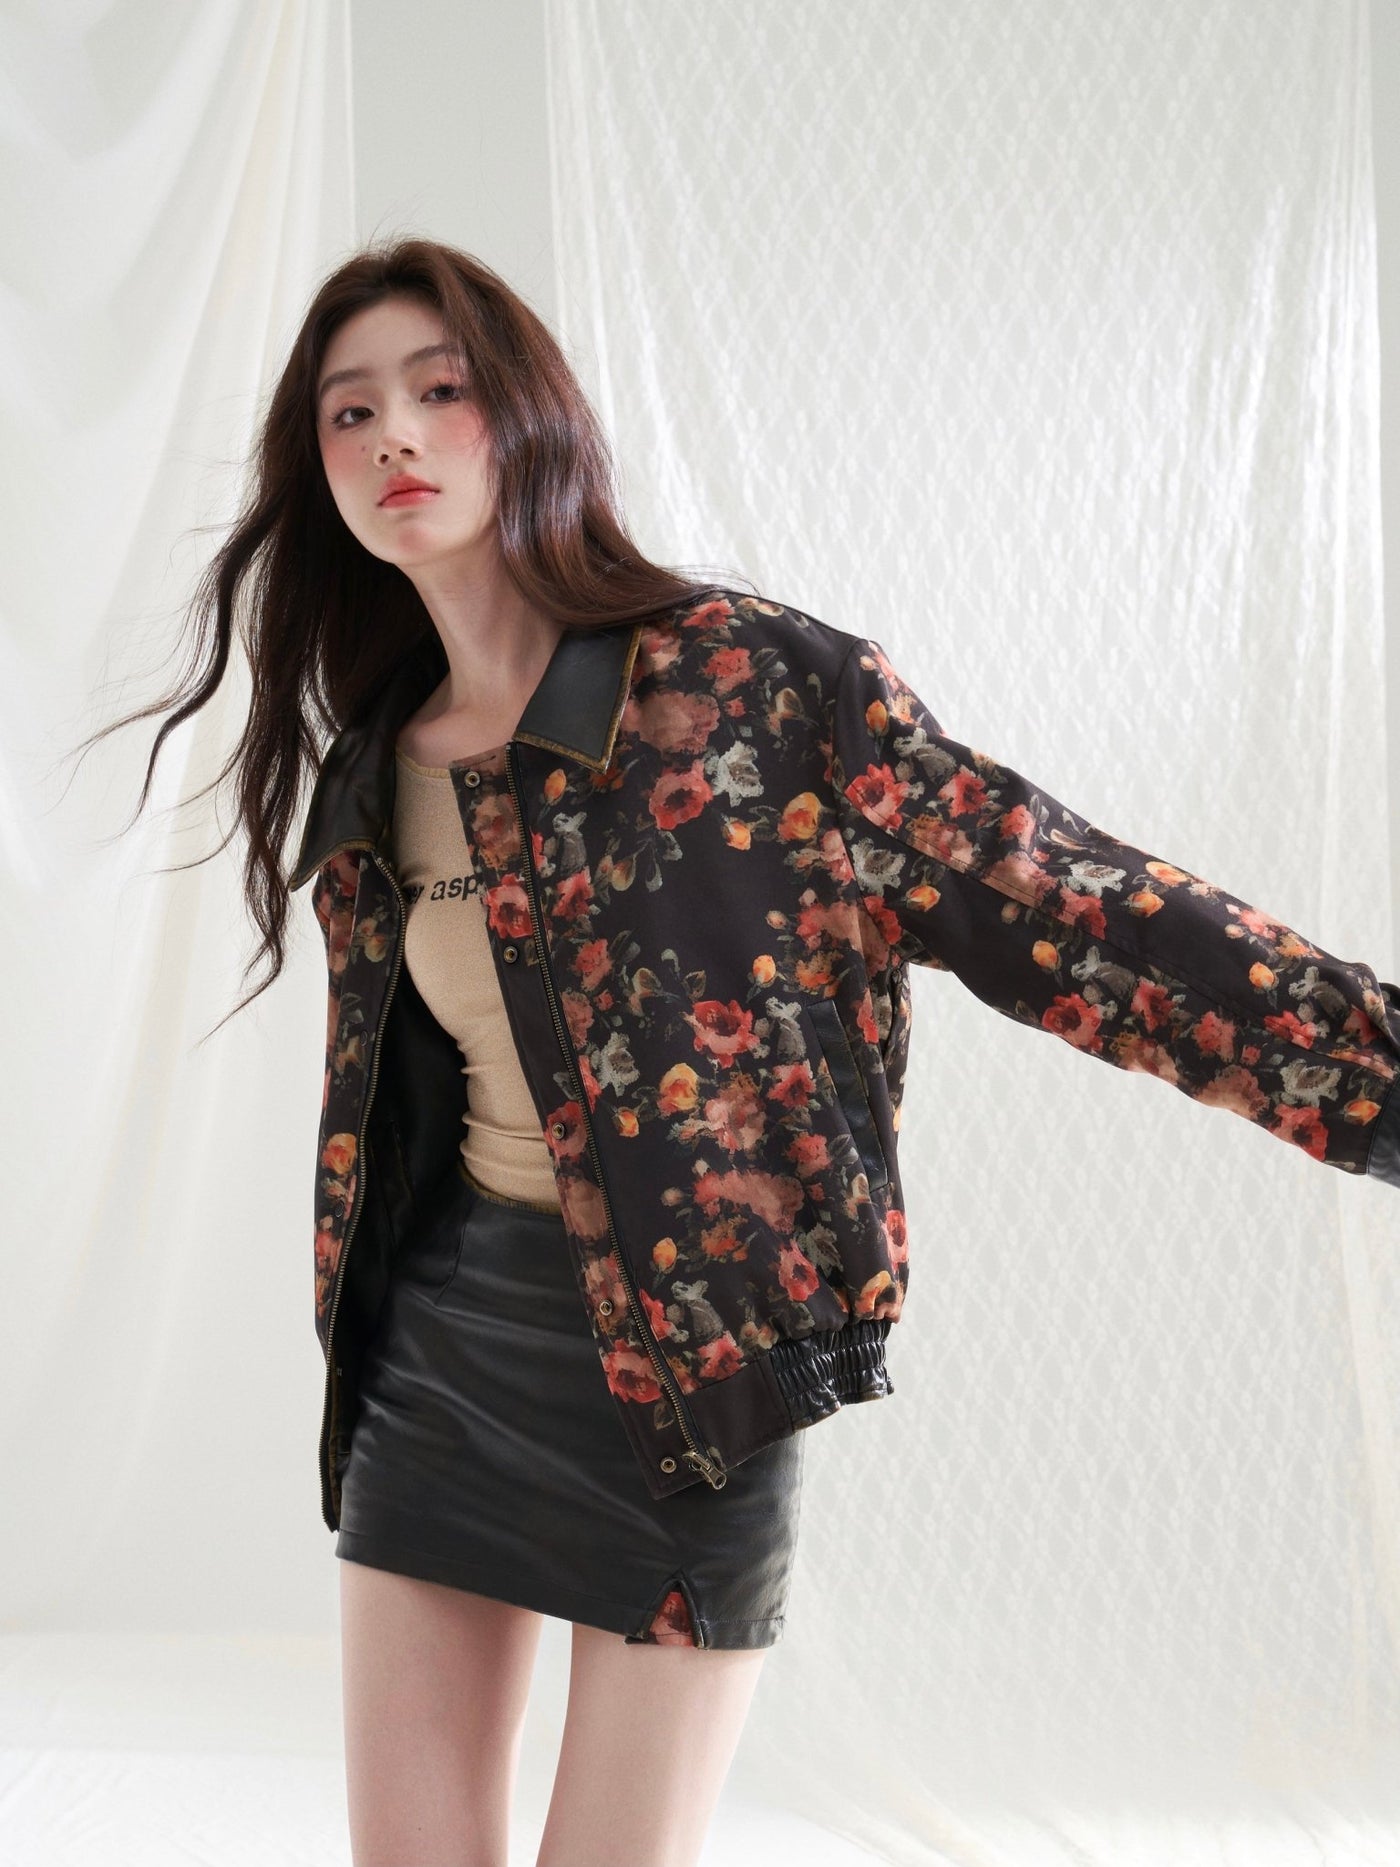 Retro Distressed Leather Reversible Floral Casual Jacket/Skirt RUS0022